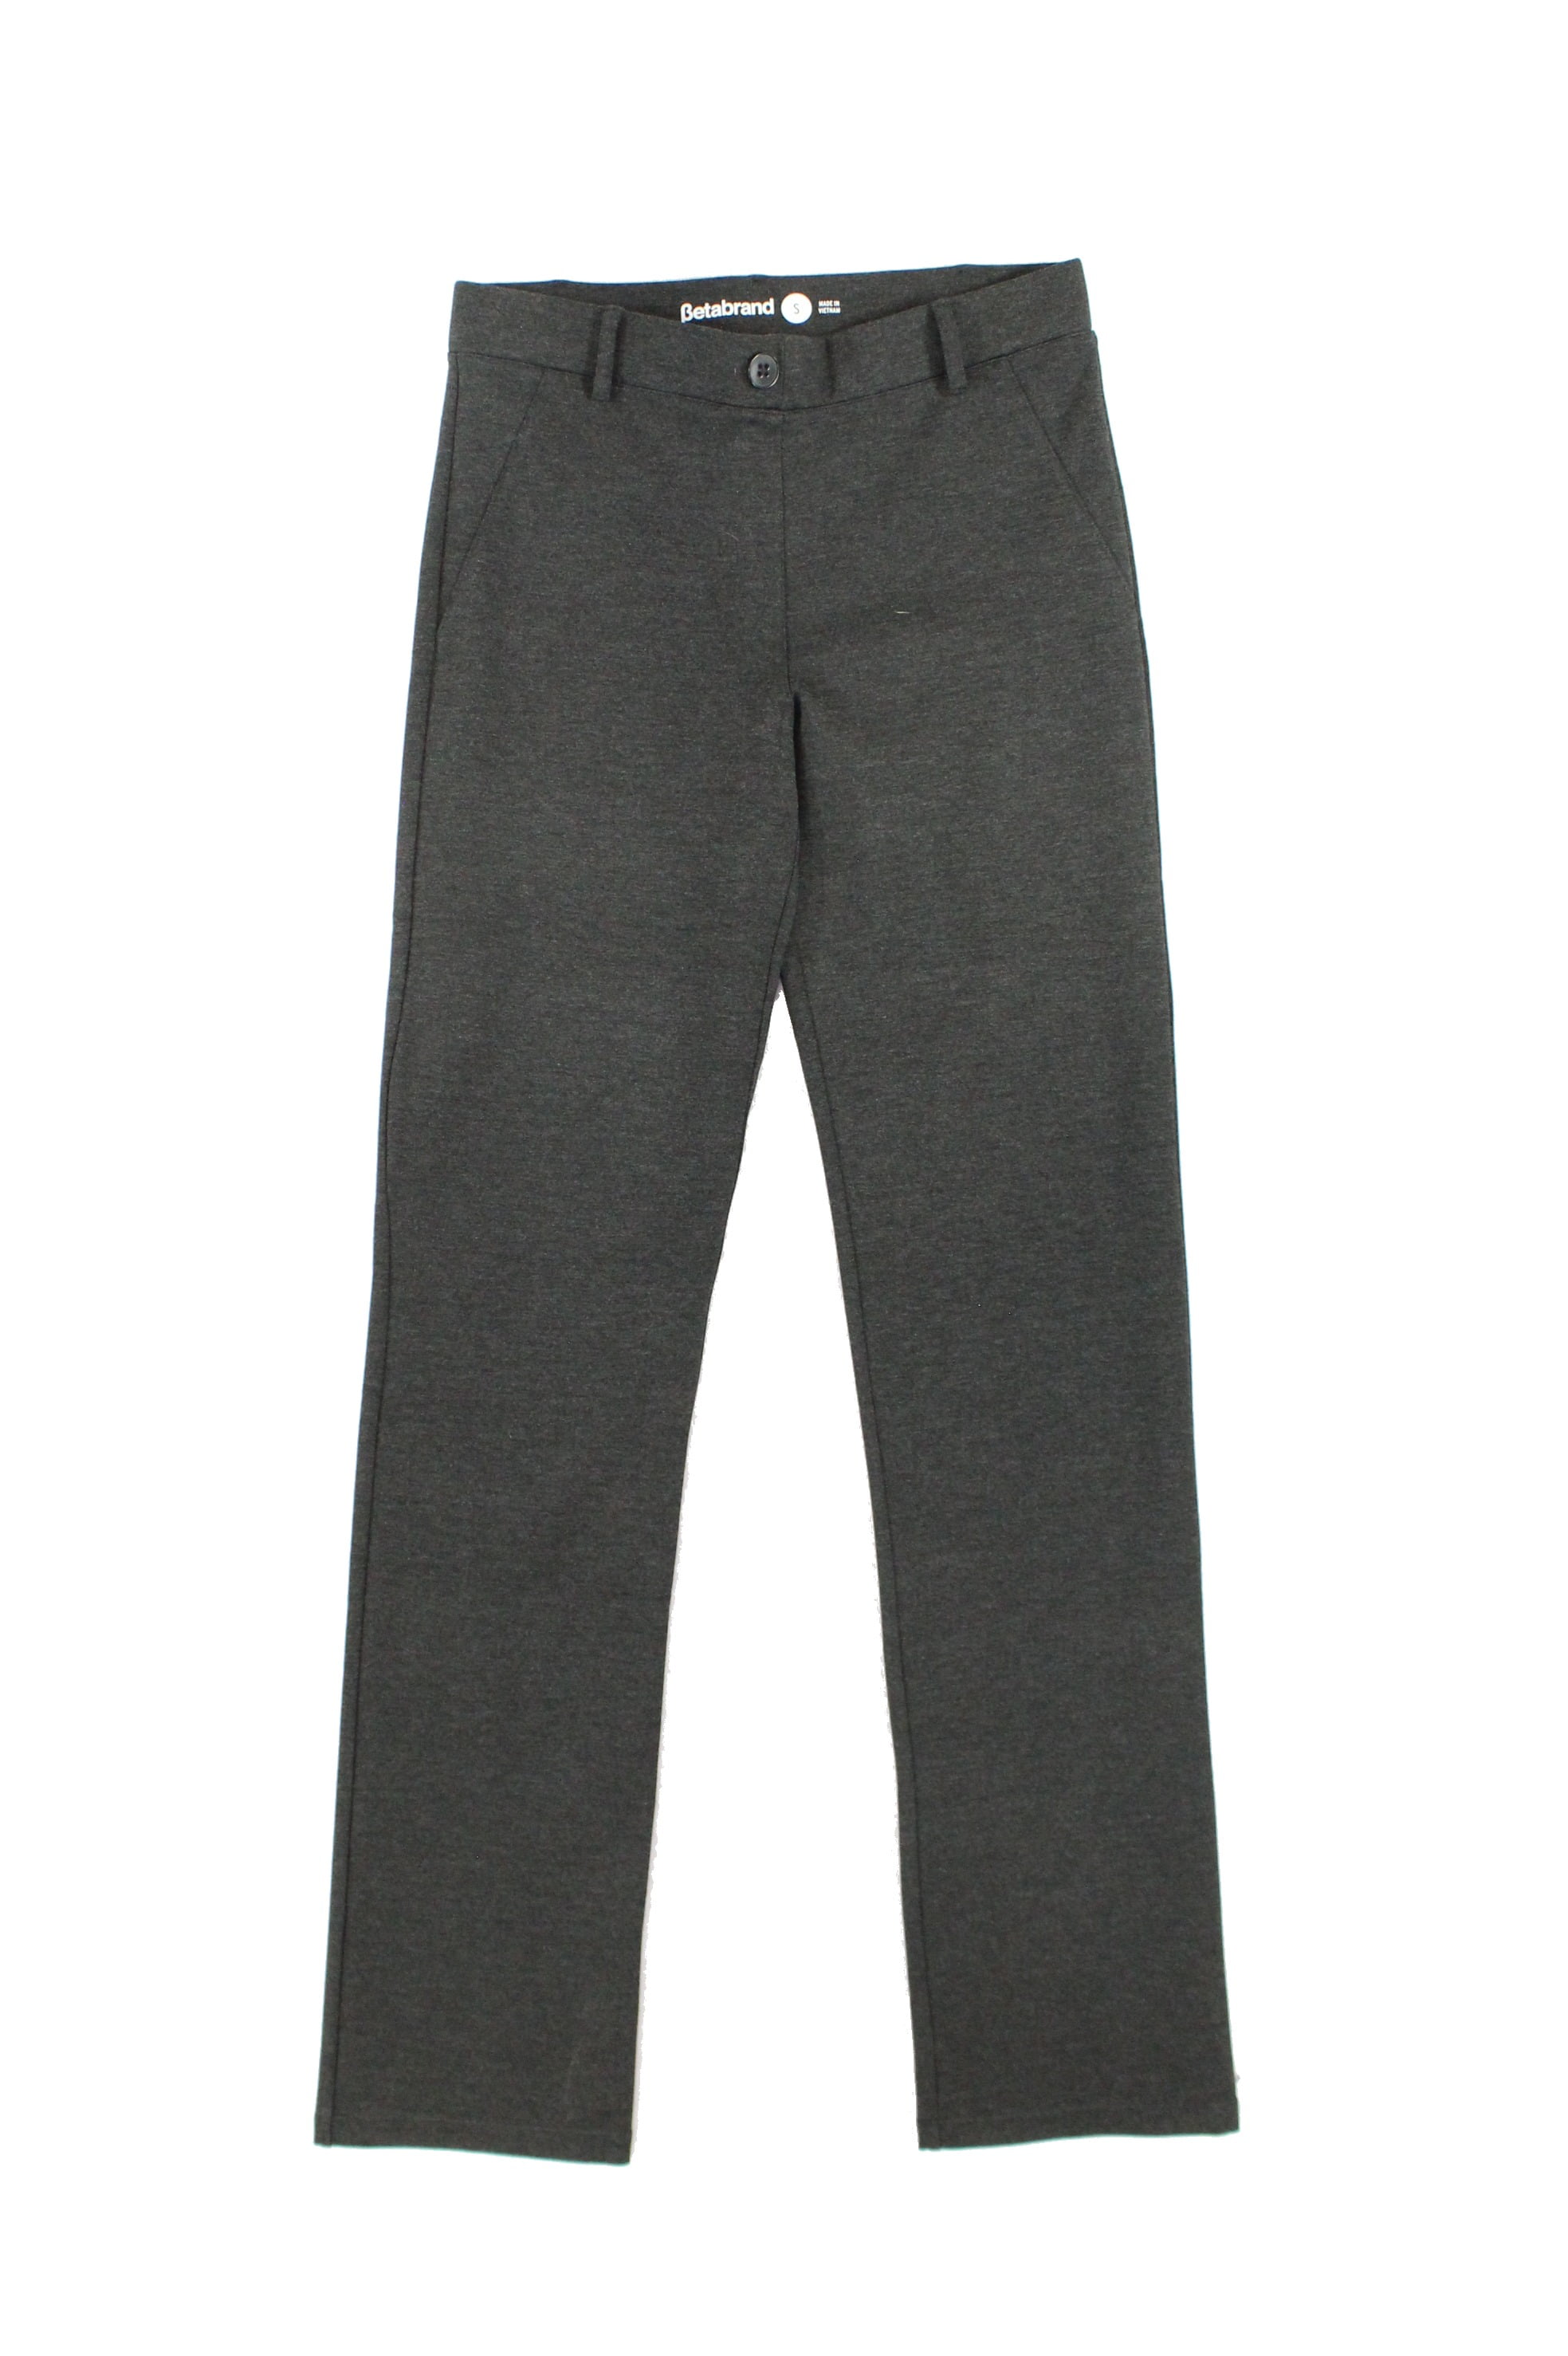 Betabrand - Betabrand NEW Charcoal Gray Womens Size Small S Stretch ...